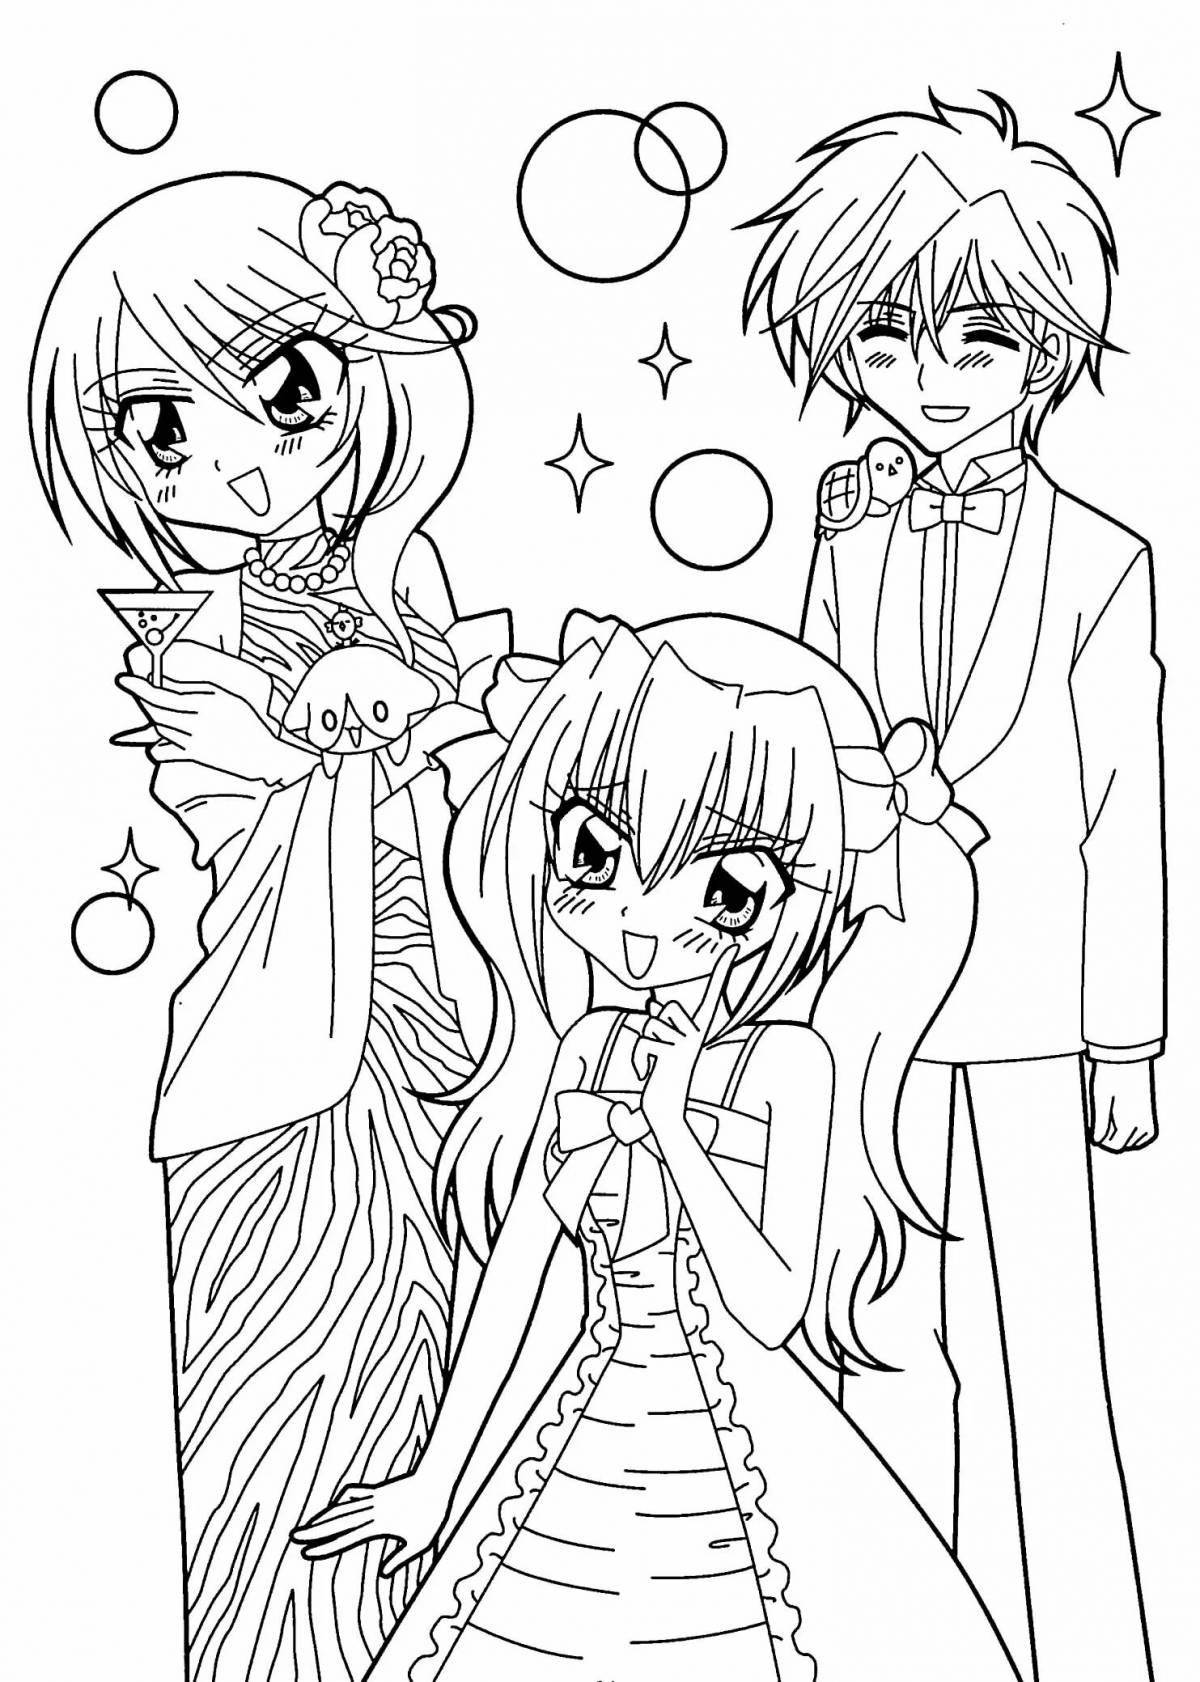 Dreamy anime boy and girl coloring book